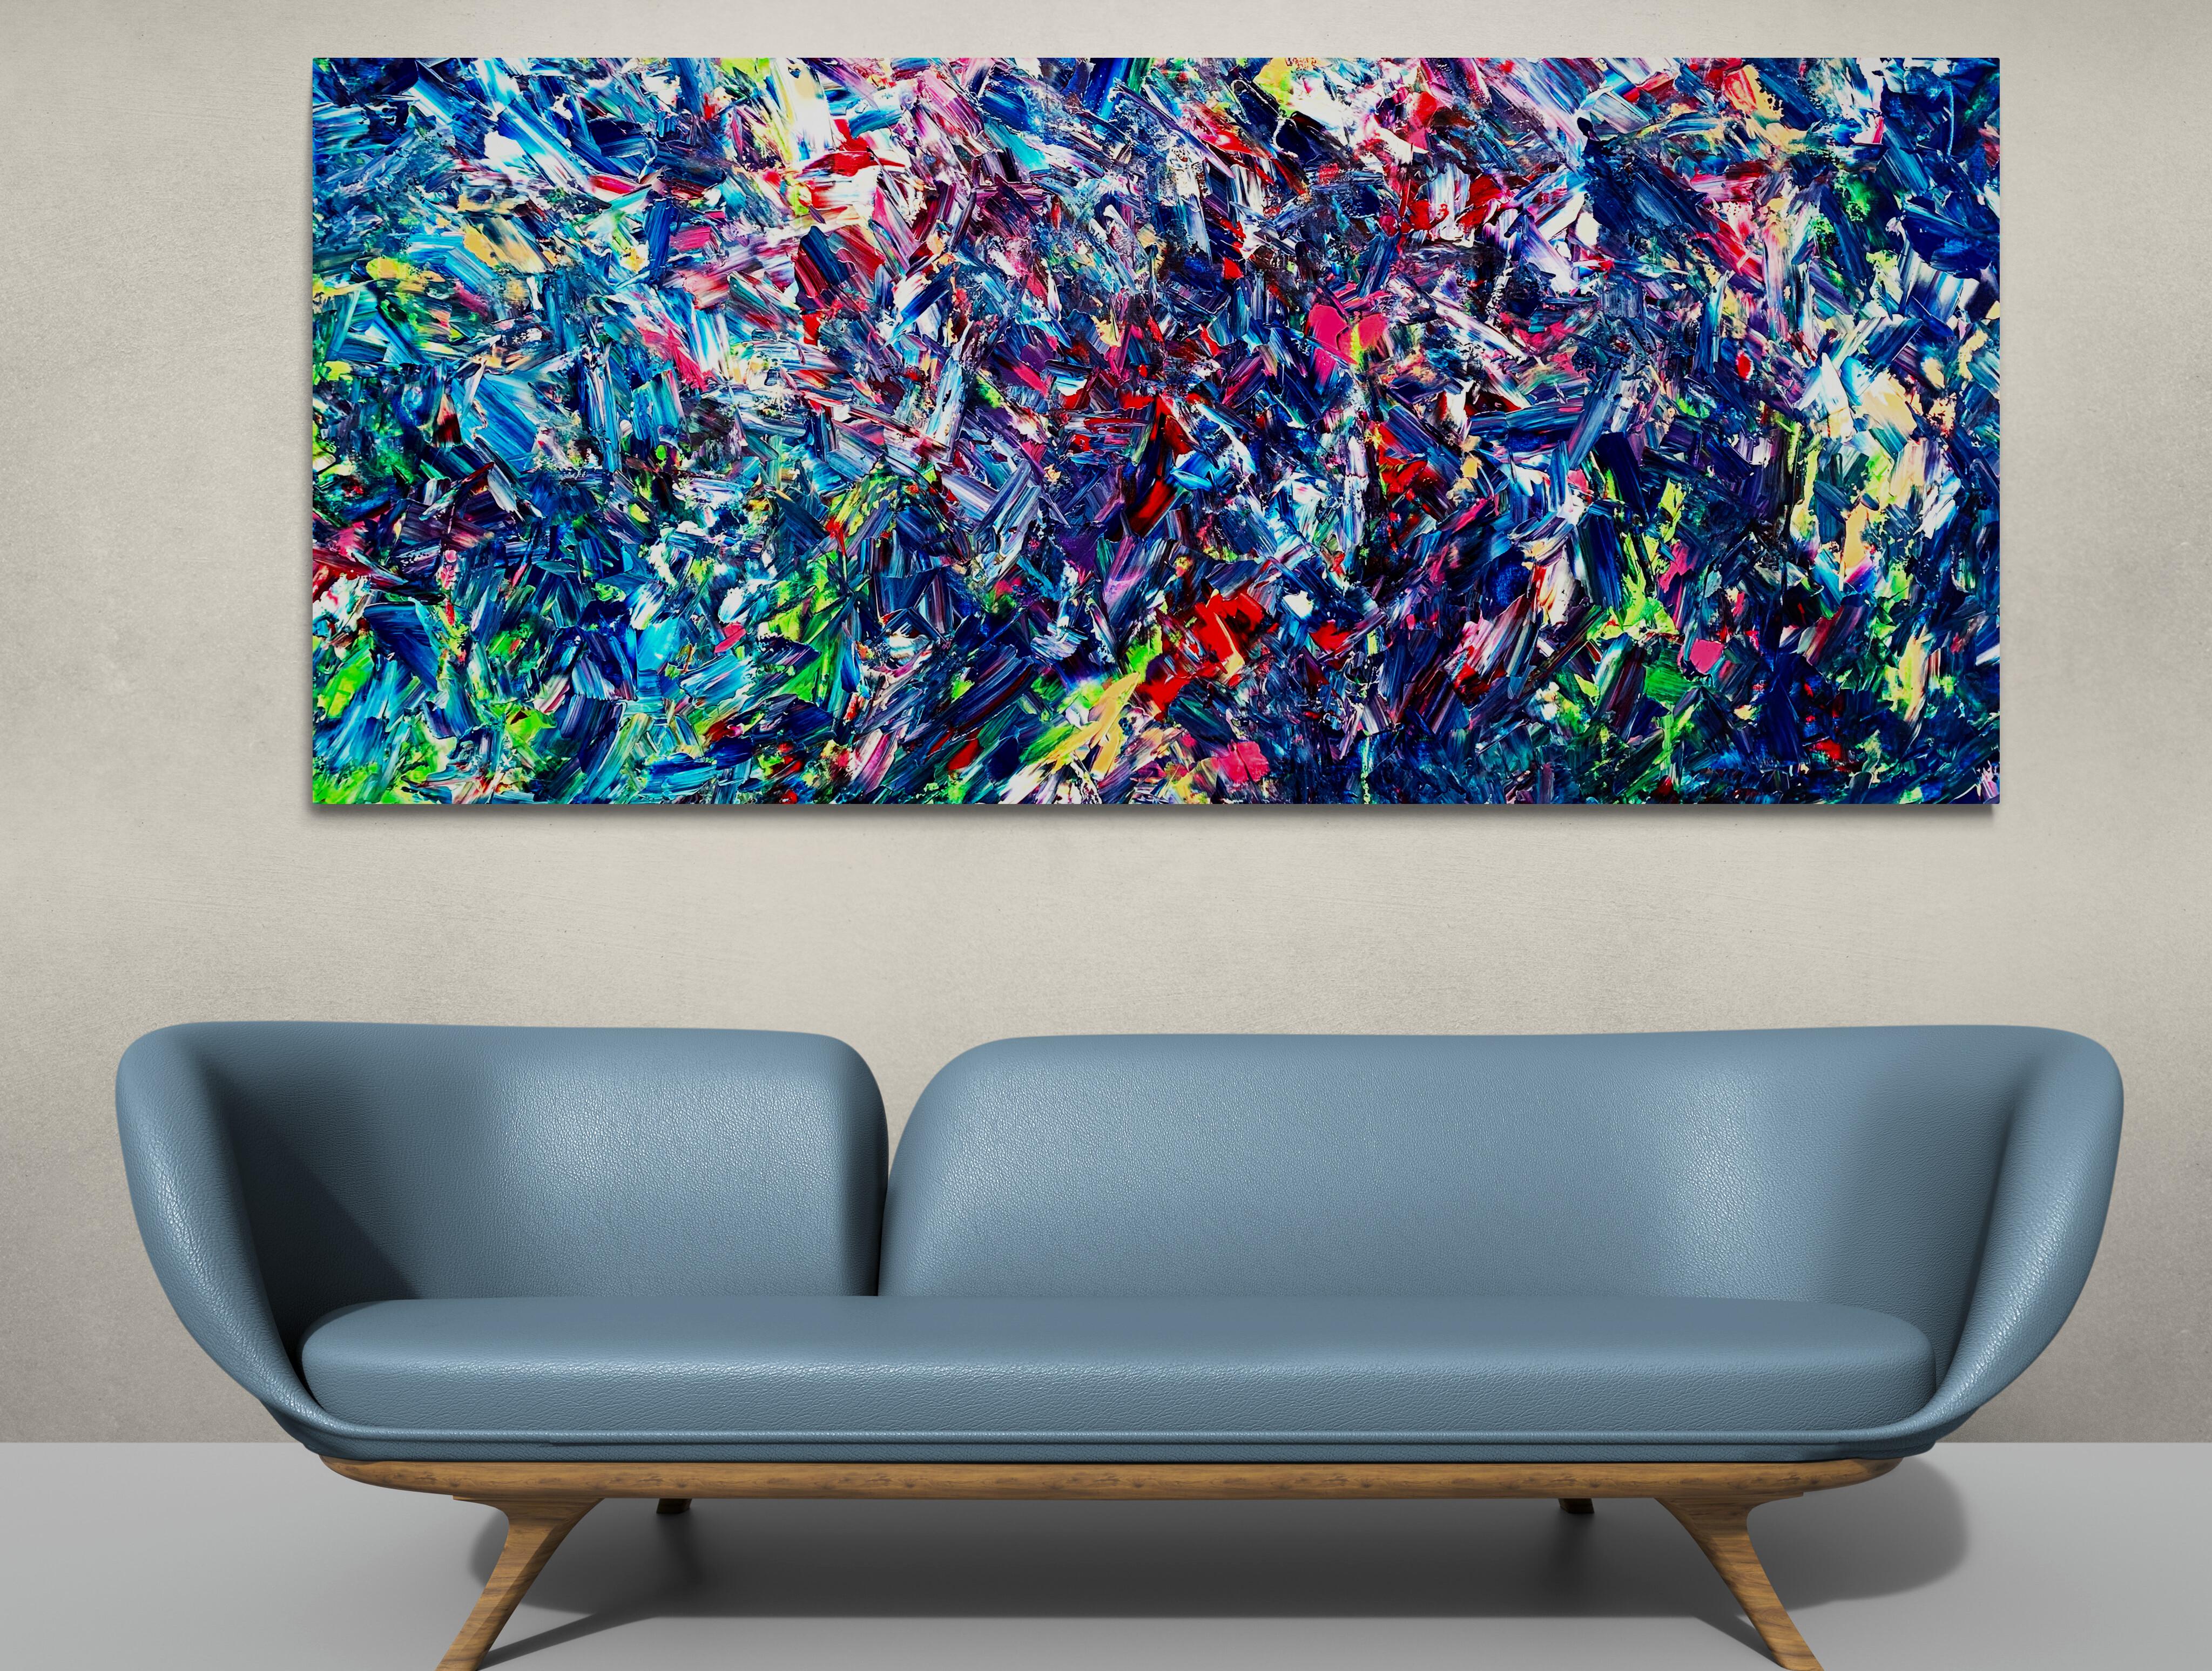 Colour Haven - Painting by Estelle Asmodelle